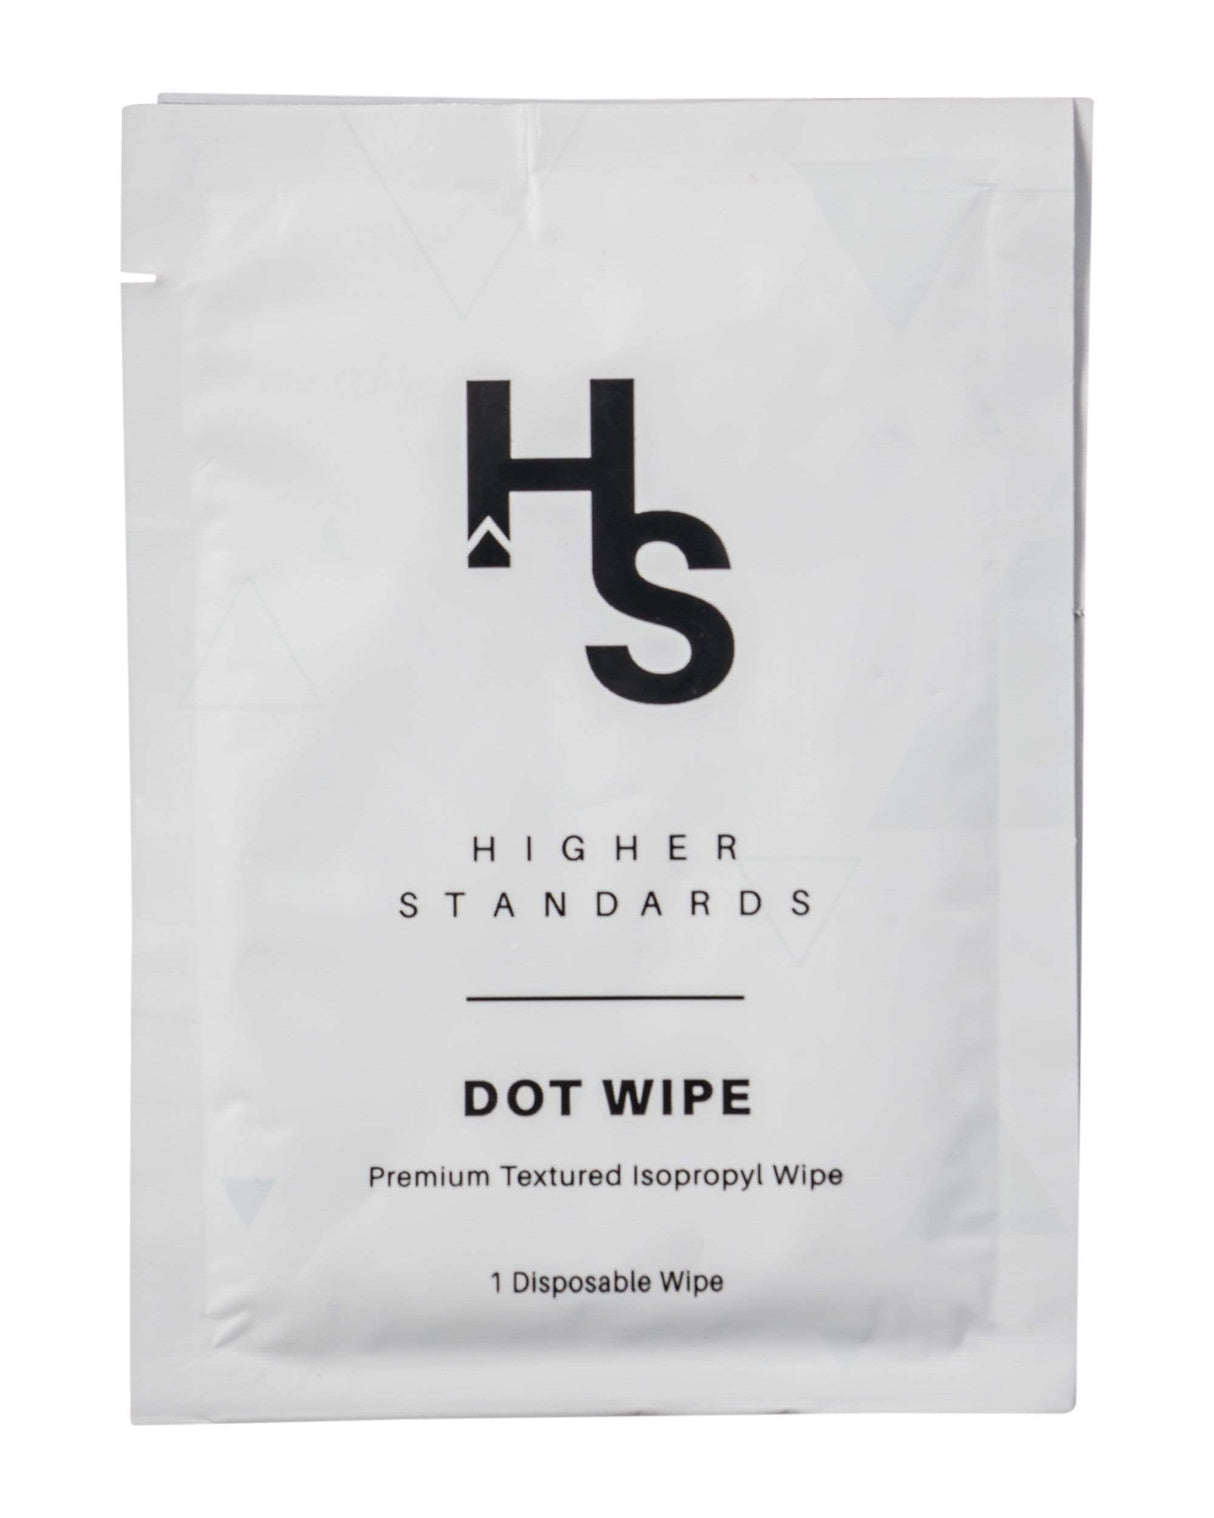 Higher Standards Dot Wipe packet, premium textured isopropyl wipe for cleaning, front view